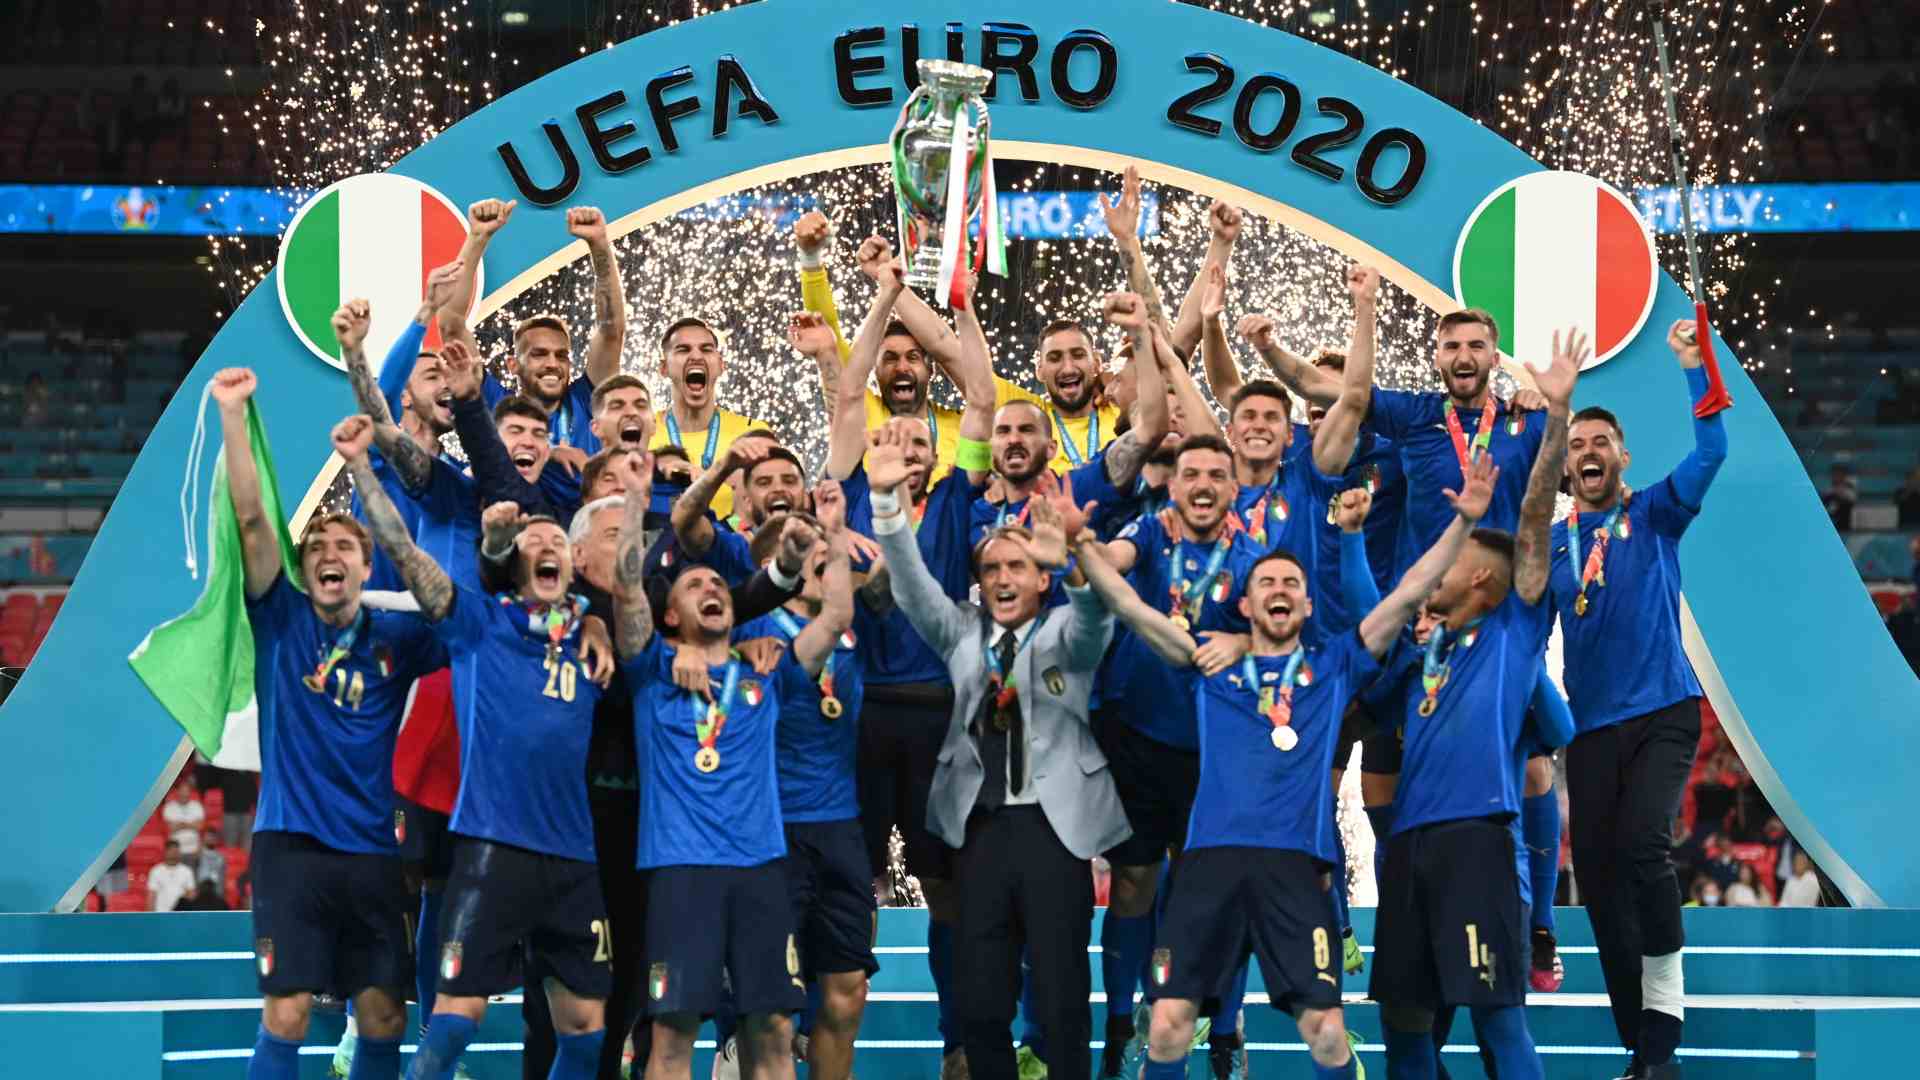 Italy edge past England in penalty shootout to lift Euro 2020 trophy